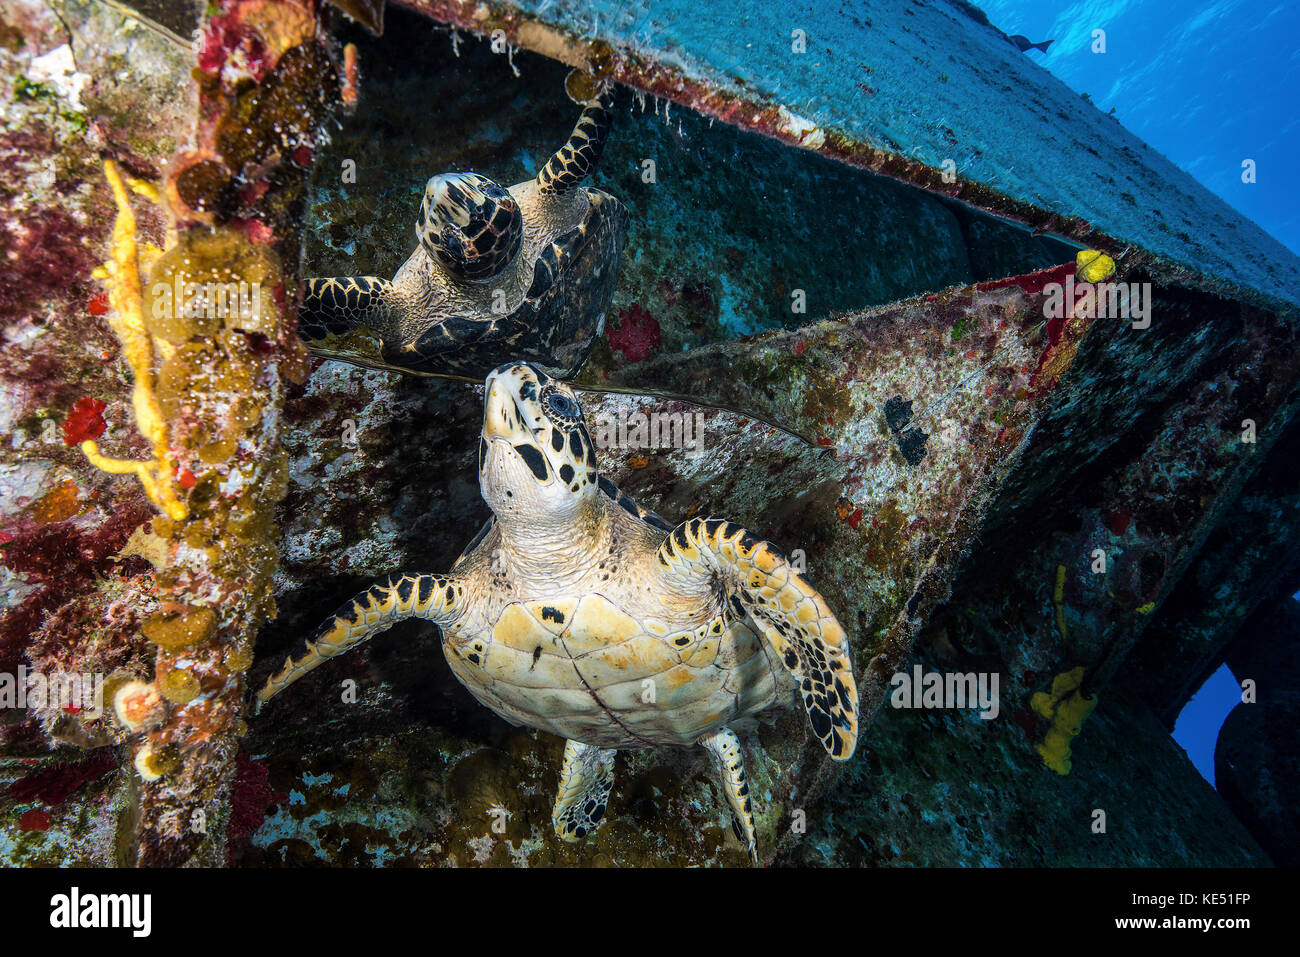 Turtle gazes at its reflection under the USS Kittiwake shipwreck in Cayman Islands. Stock Photo